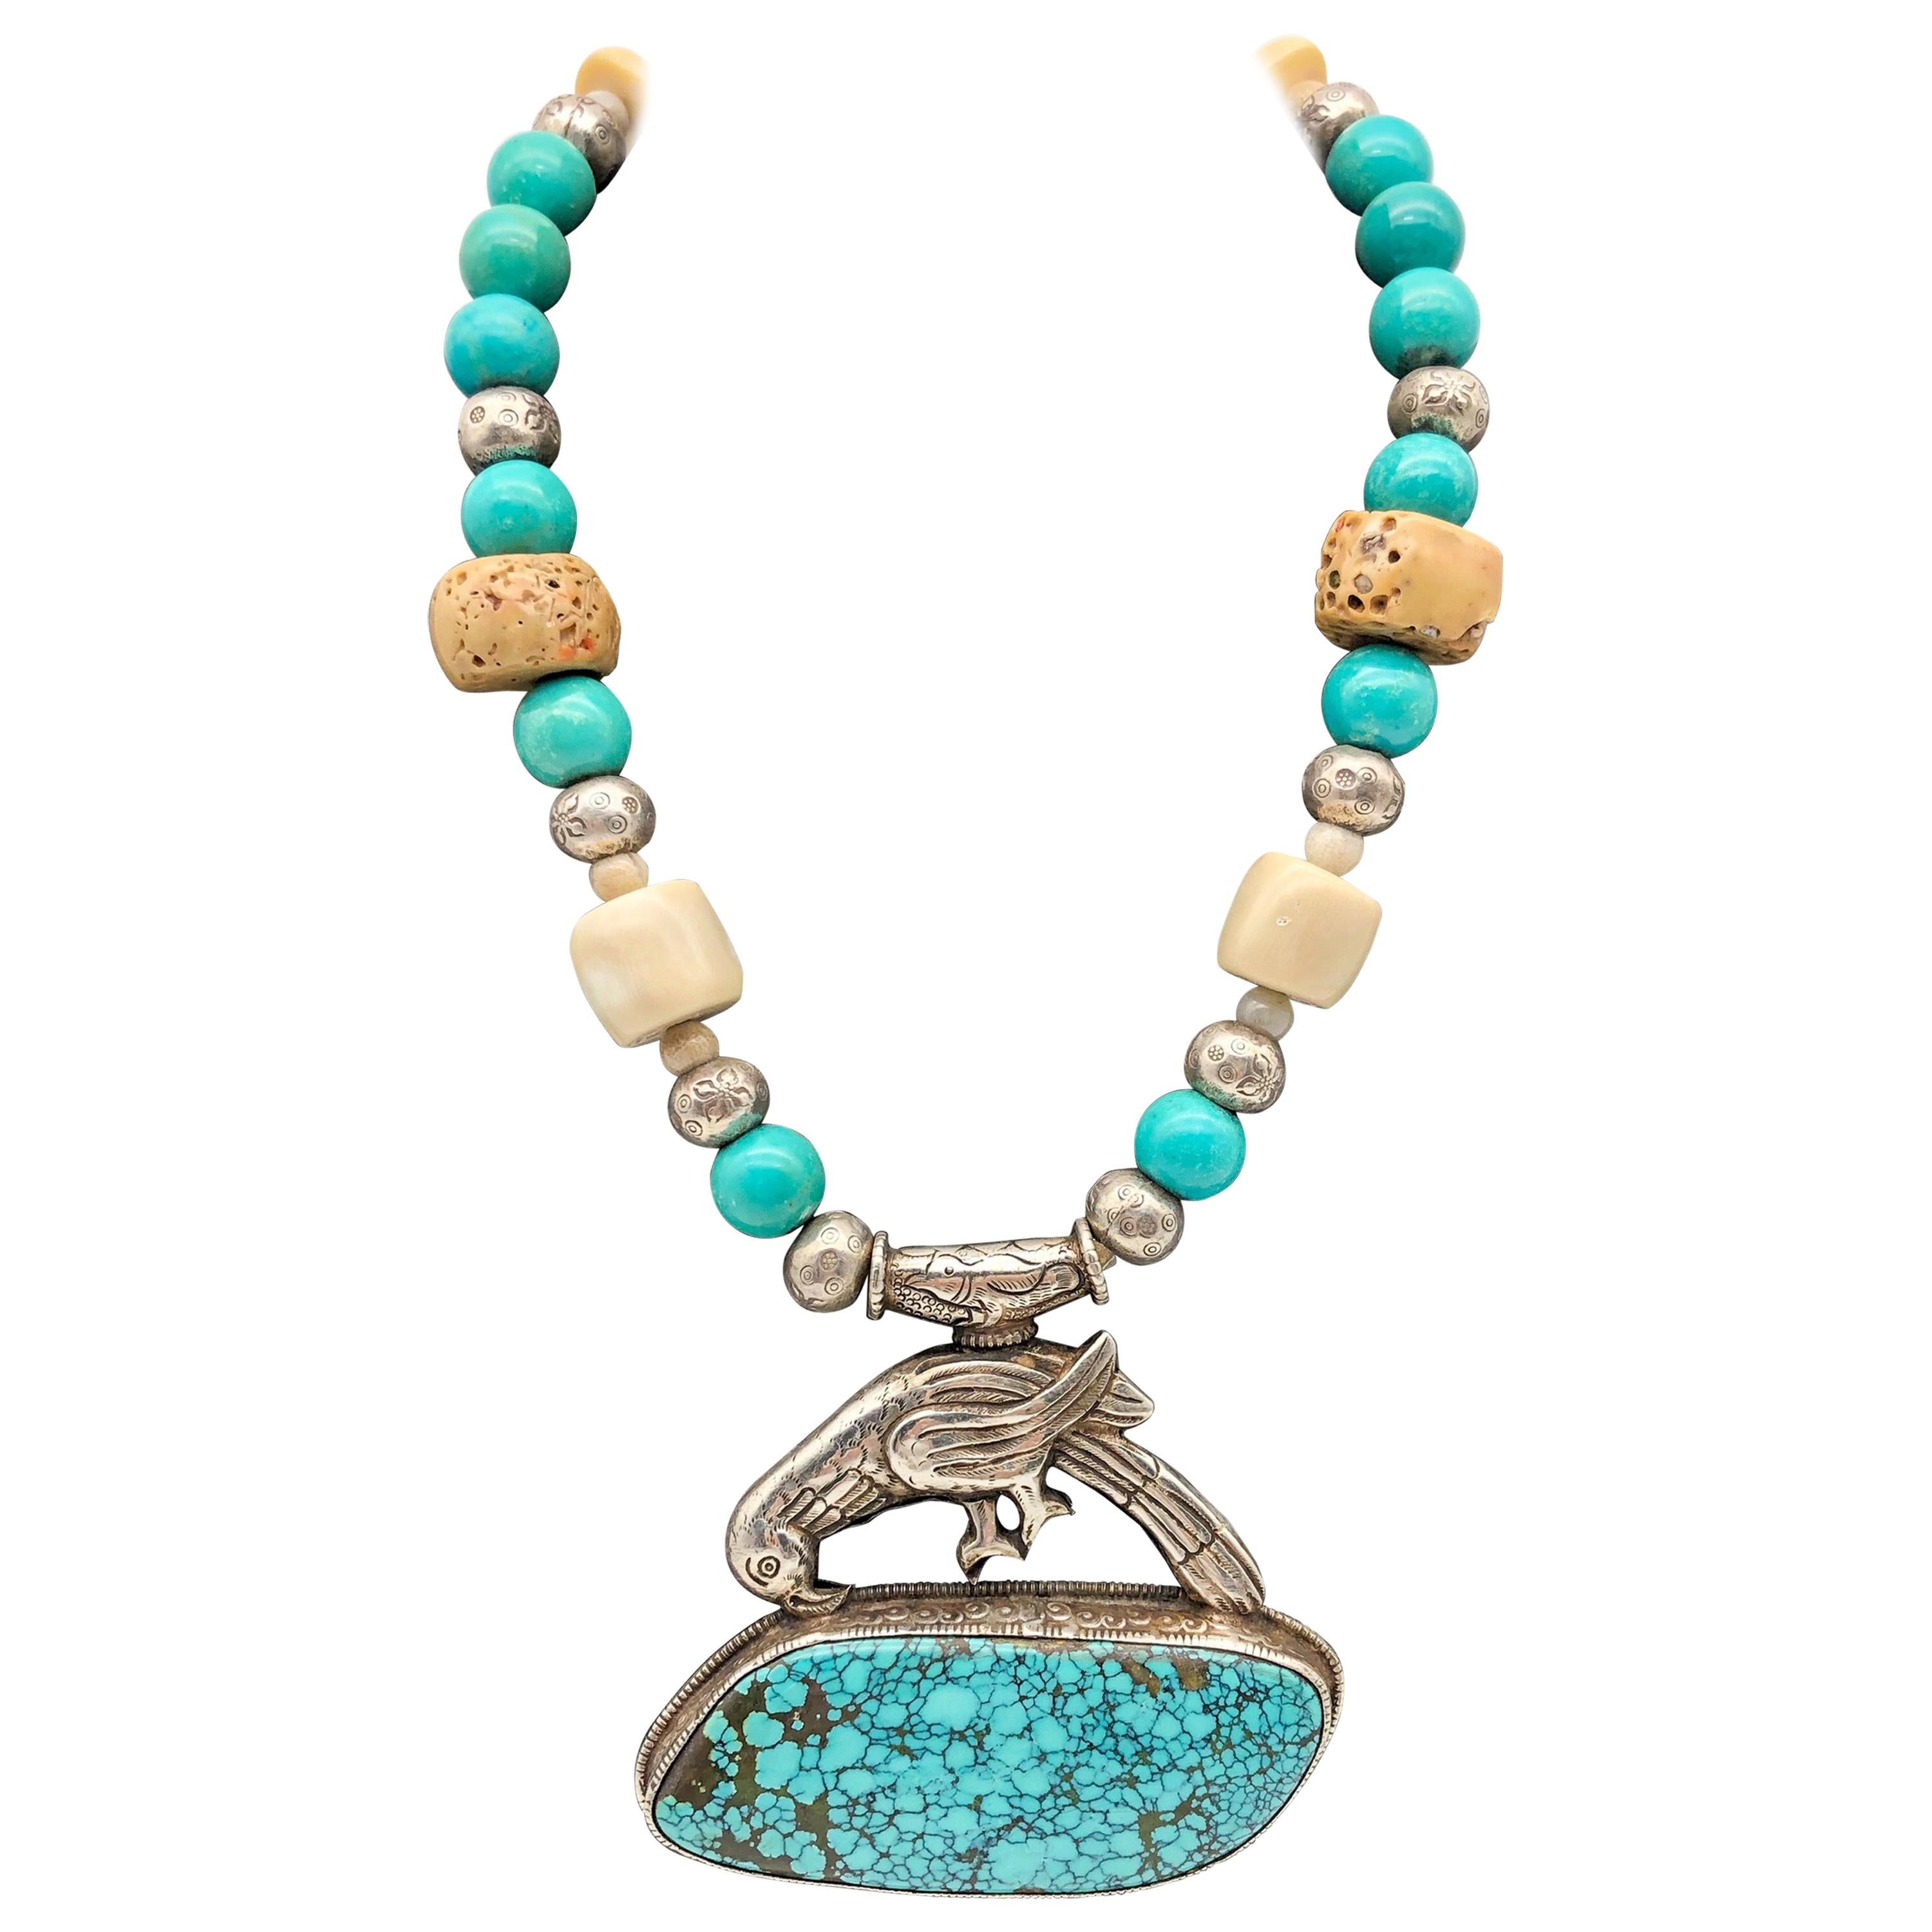 A.Jeschel Turquoise and Ethnic beads necklace with Tibetan Silver Bird Pendant  